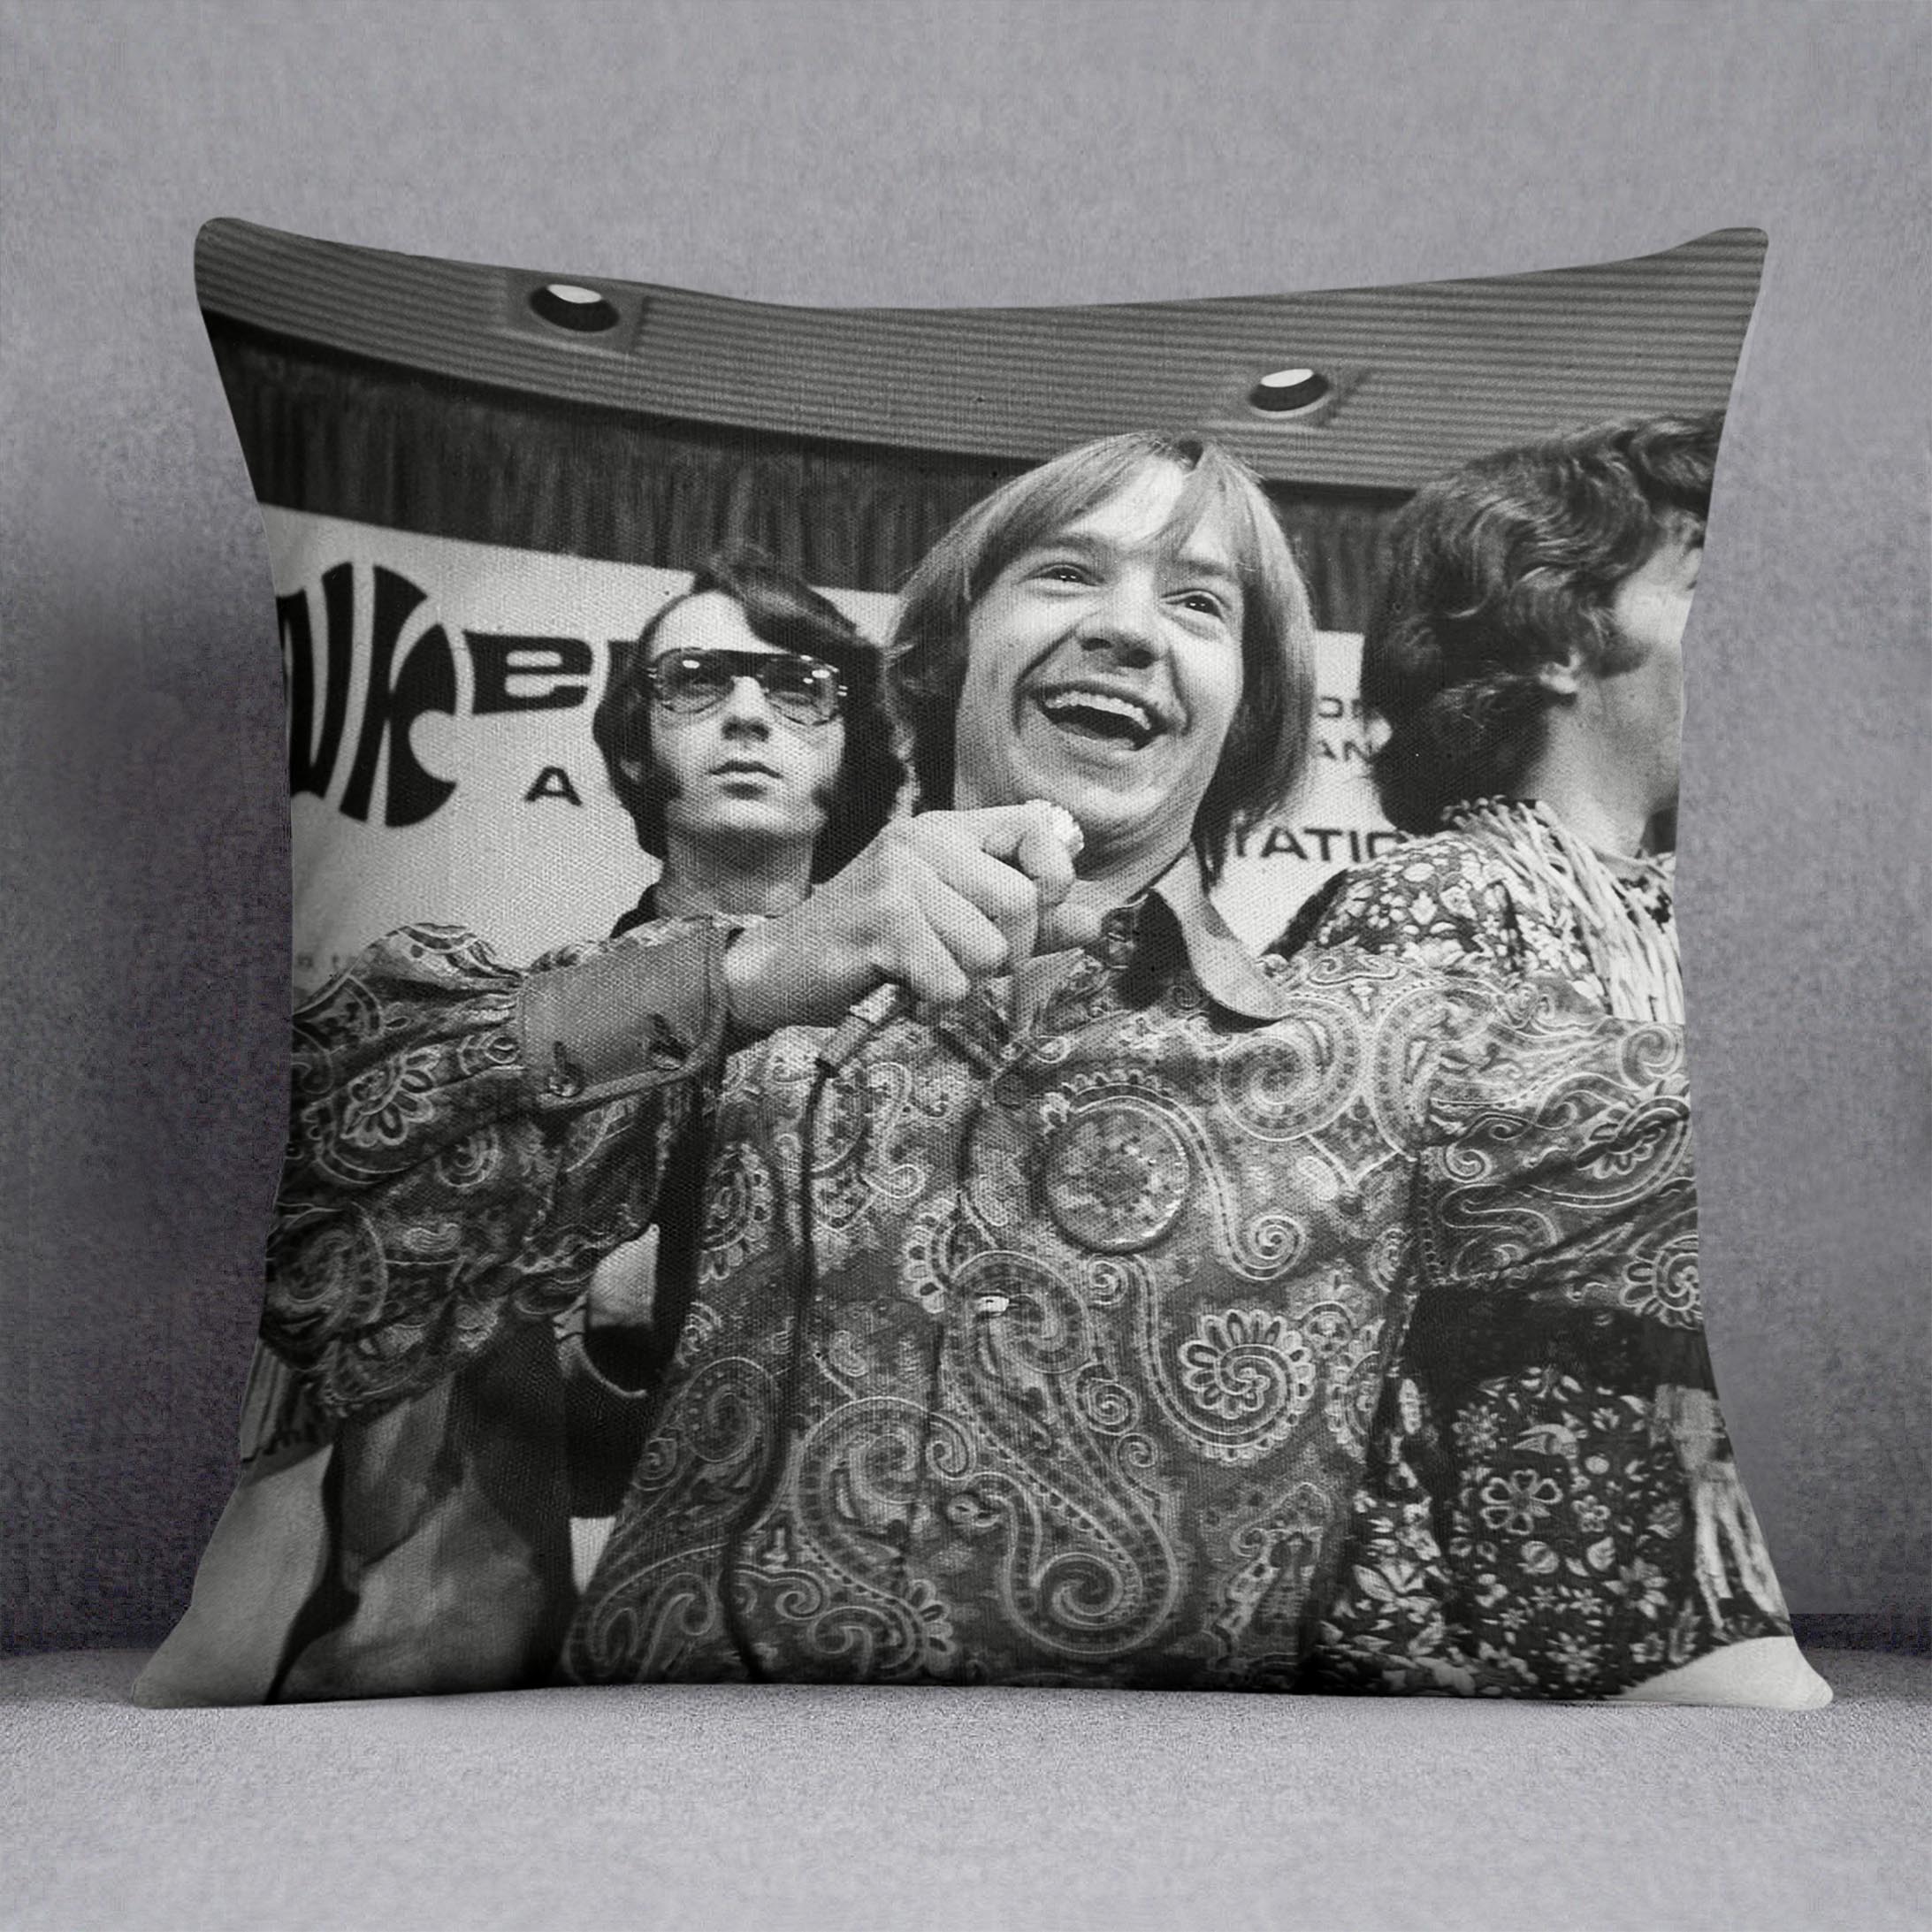 The Monkees playing around Cushion